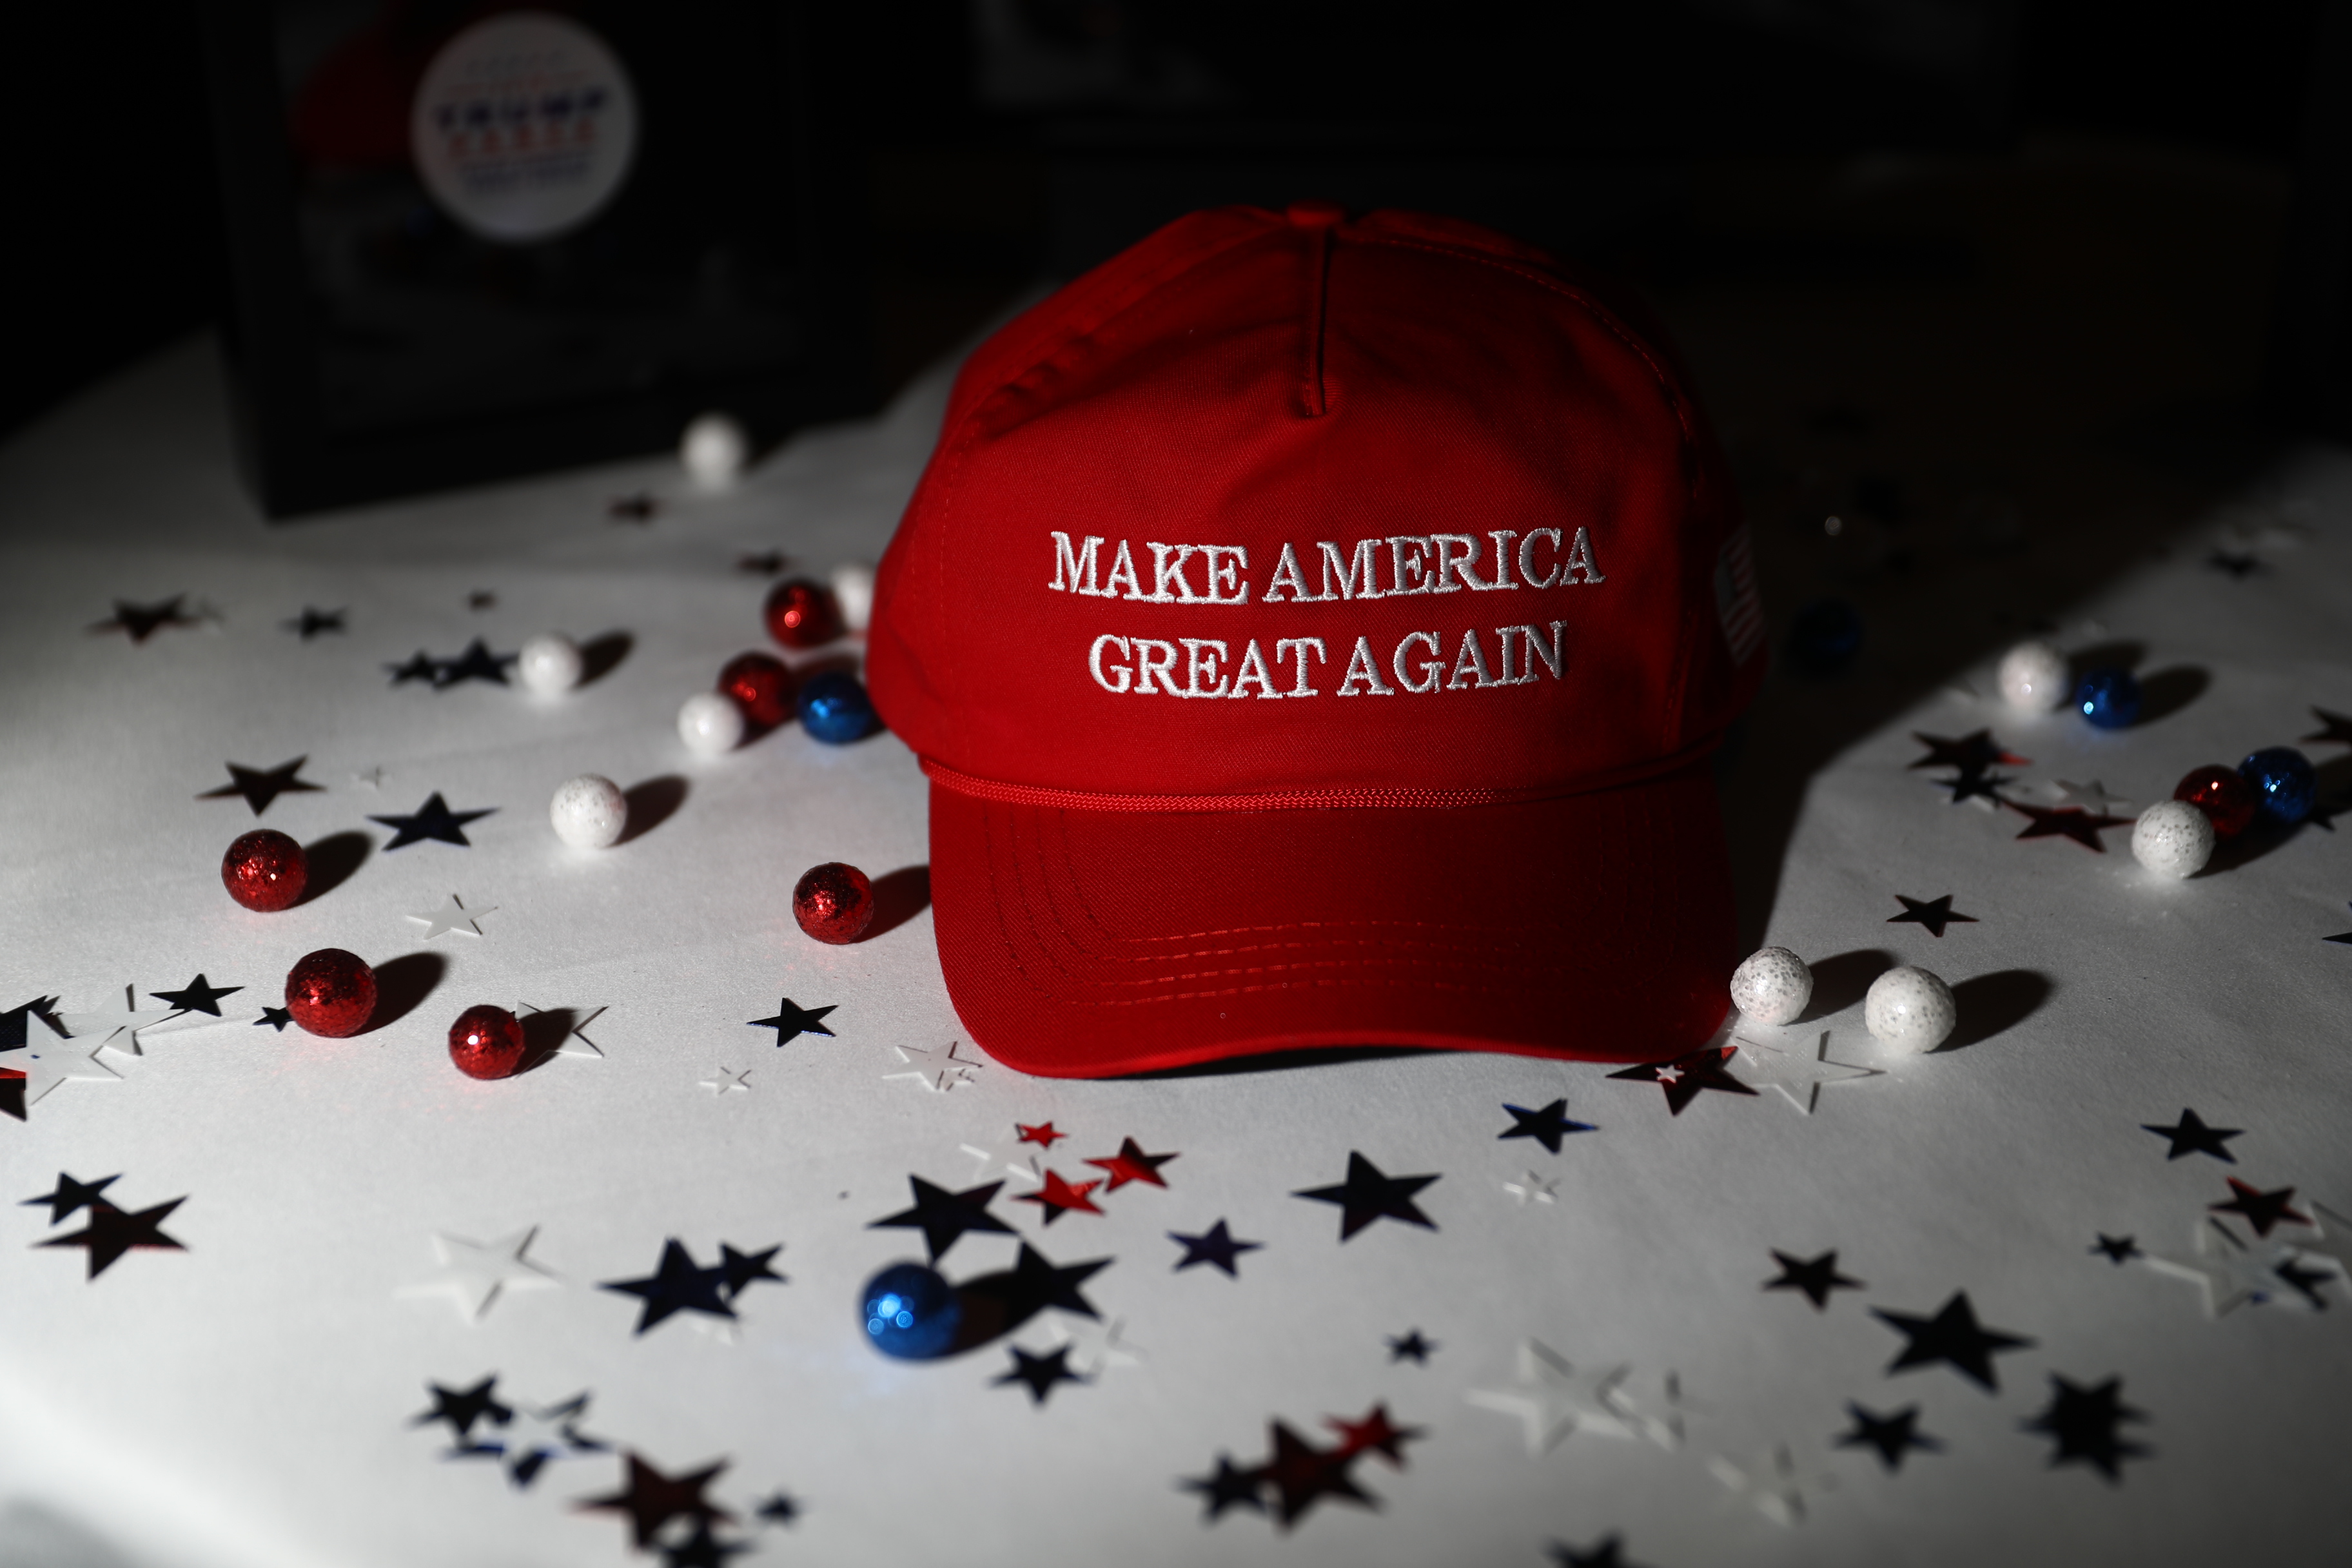 A "Make America Great Again" hat sits on a table ahead of an election-night party for the 2016 Republican presidential nominee Donald Trump at the Hilton Midtown hotel in New York City on  Nov. 8, 2016 (Bloomberg/Getty Images)